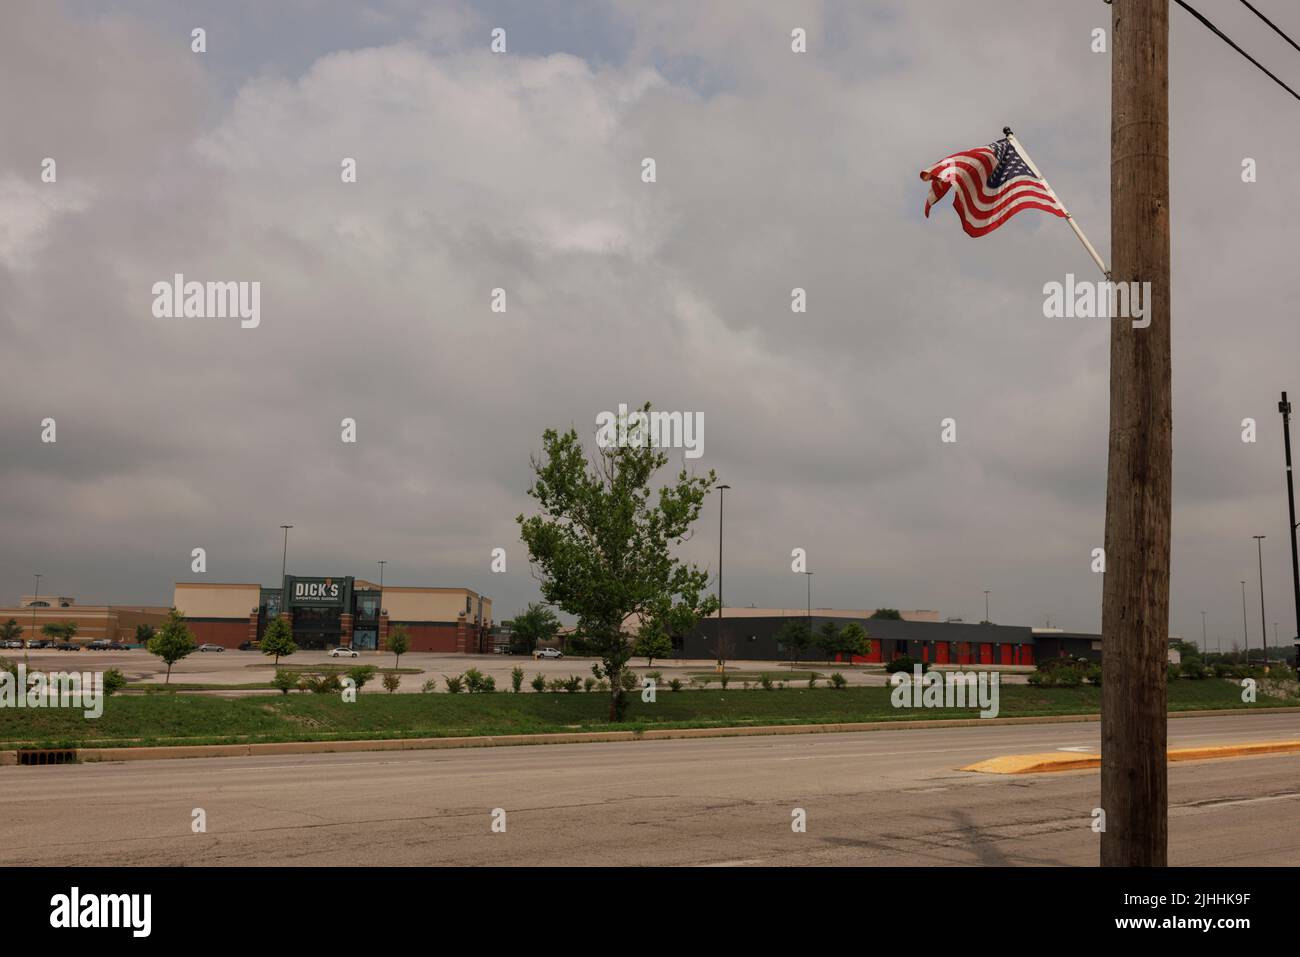 GREENWOOD, IN - JULY 18: Dick’s Sporting Goods entrance near the food court entrance of Greenwood Park Mall on July 18, 2022 in Greenwood, Indiana.  A gunman allegedly used a long gun to fire shots in the mall’s food court on July 17, killing three and injuring two before being killed by an armed bystander. Stock Photo